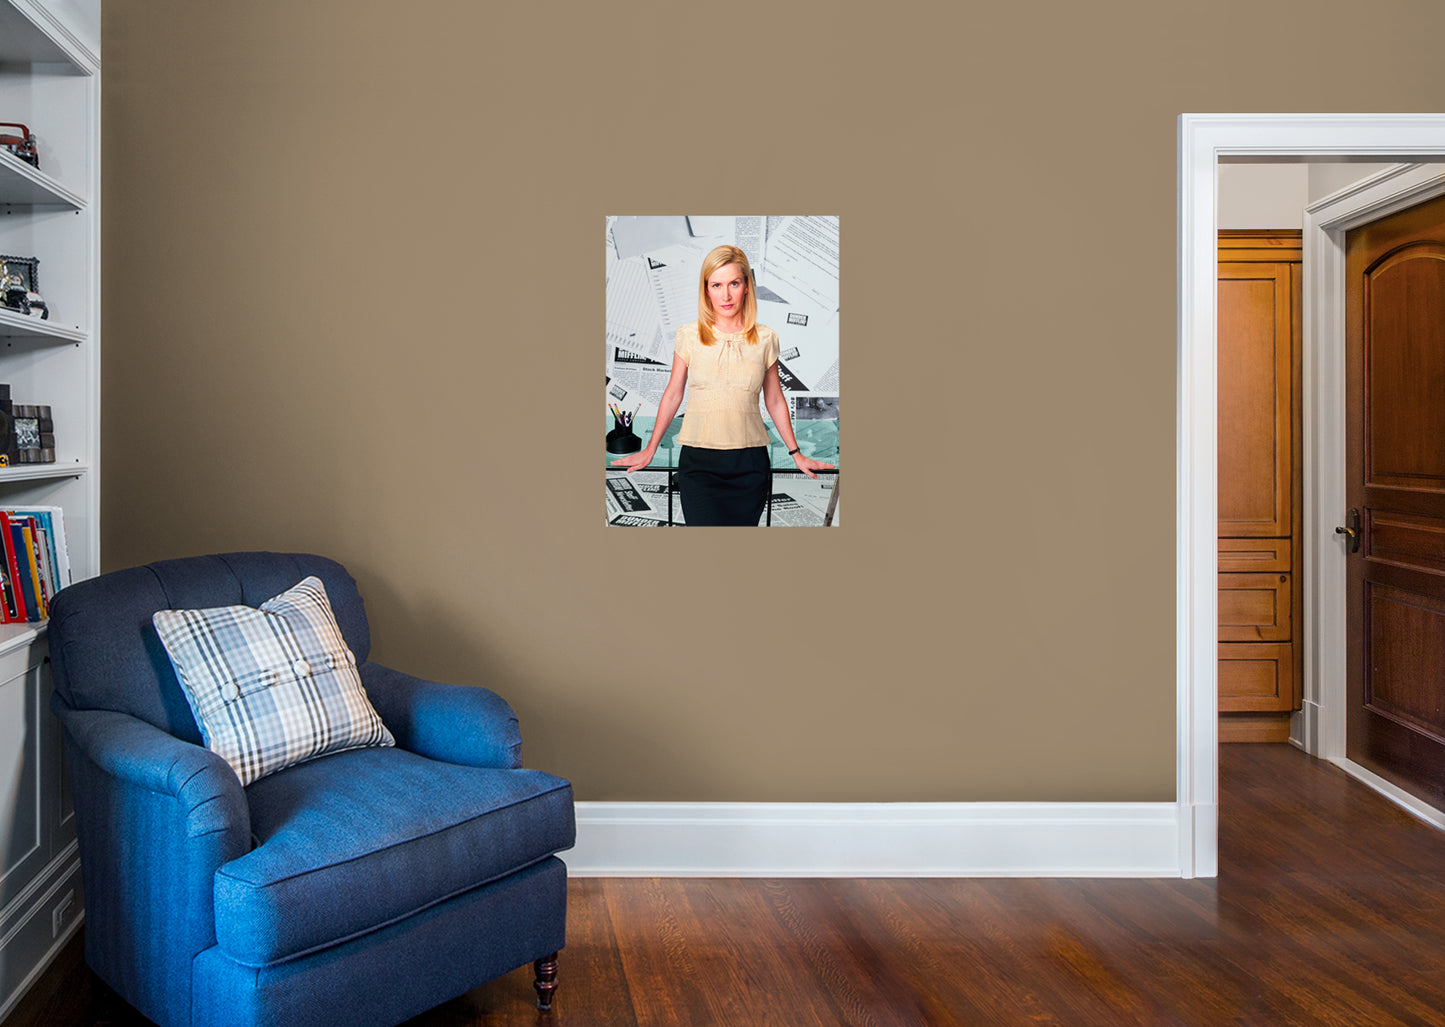 The Office: Angela Mural        - Officially Licensed NBC Universal Removable Wall   Adhesive Decal